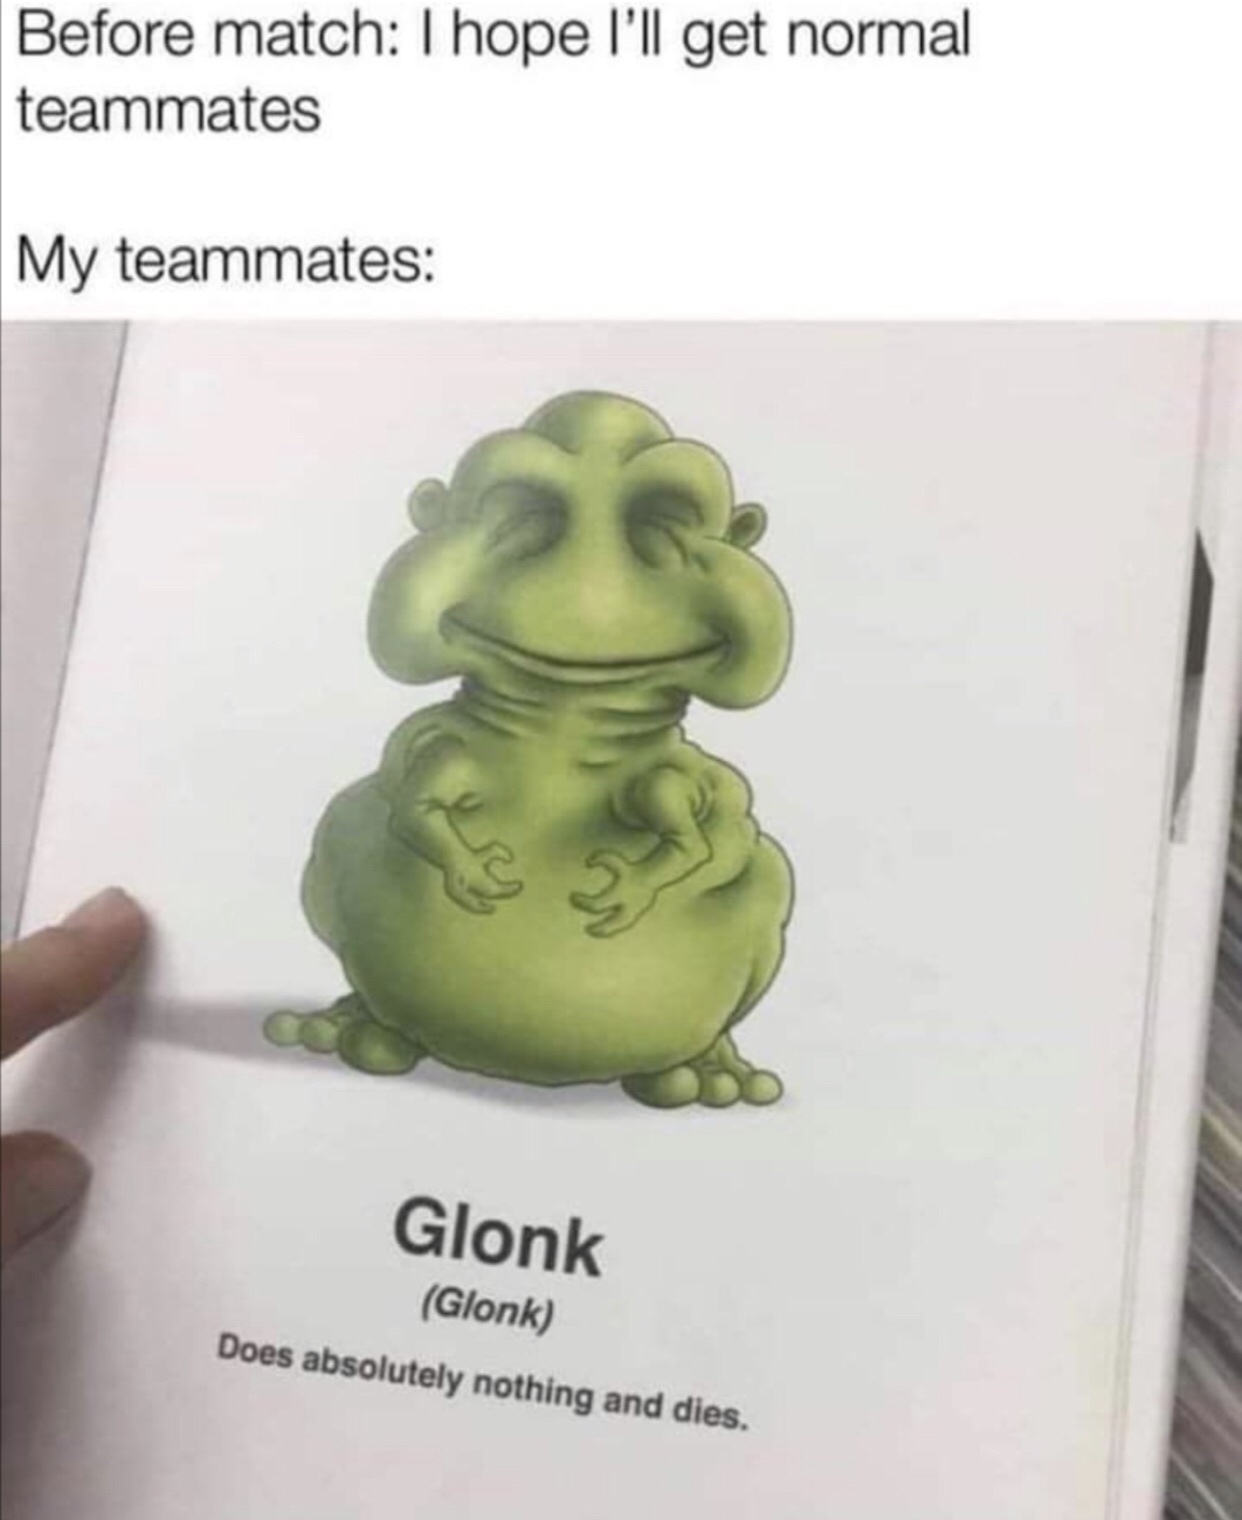 gonk spirit animal - Before match I hope I'll get normal teammates My teammates Glonk Glonk Does absolutely nothing and dies.